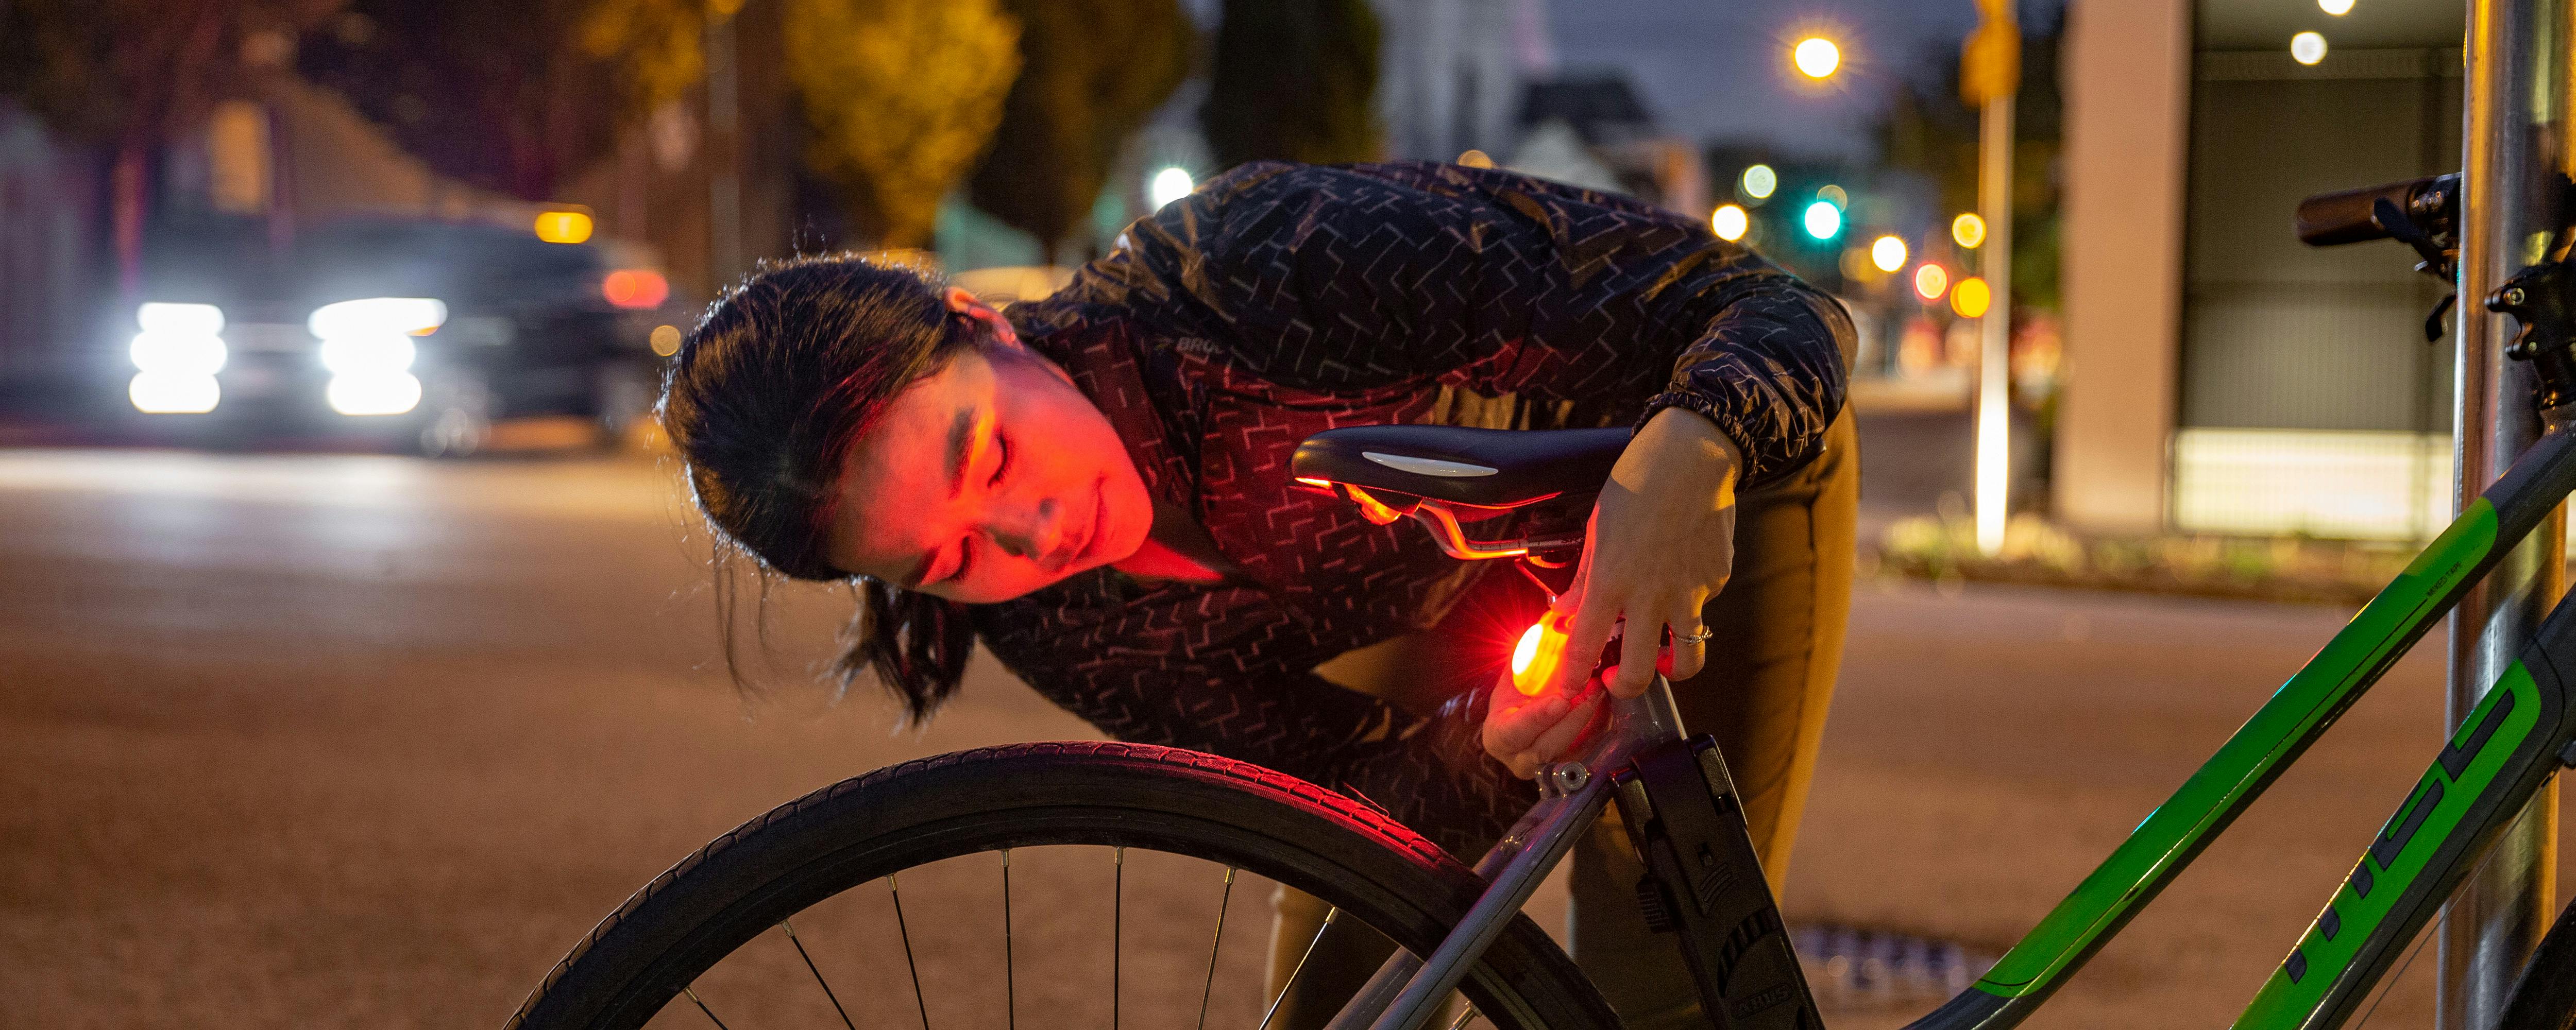 How to Choose Bike Lights for City or Off Road Cycling | MEC | MEC